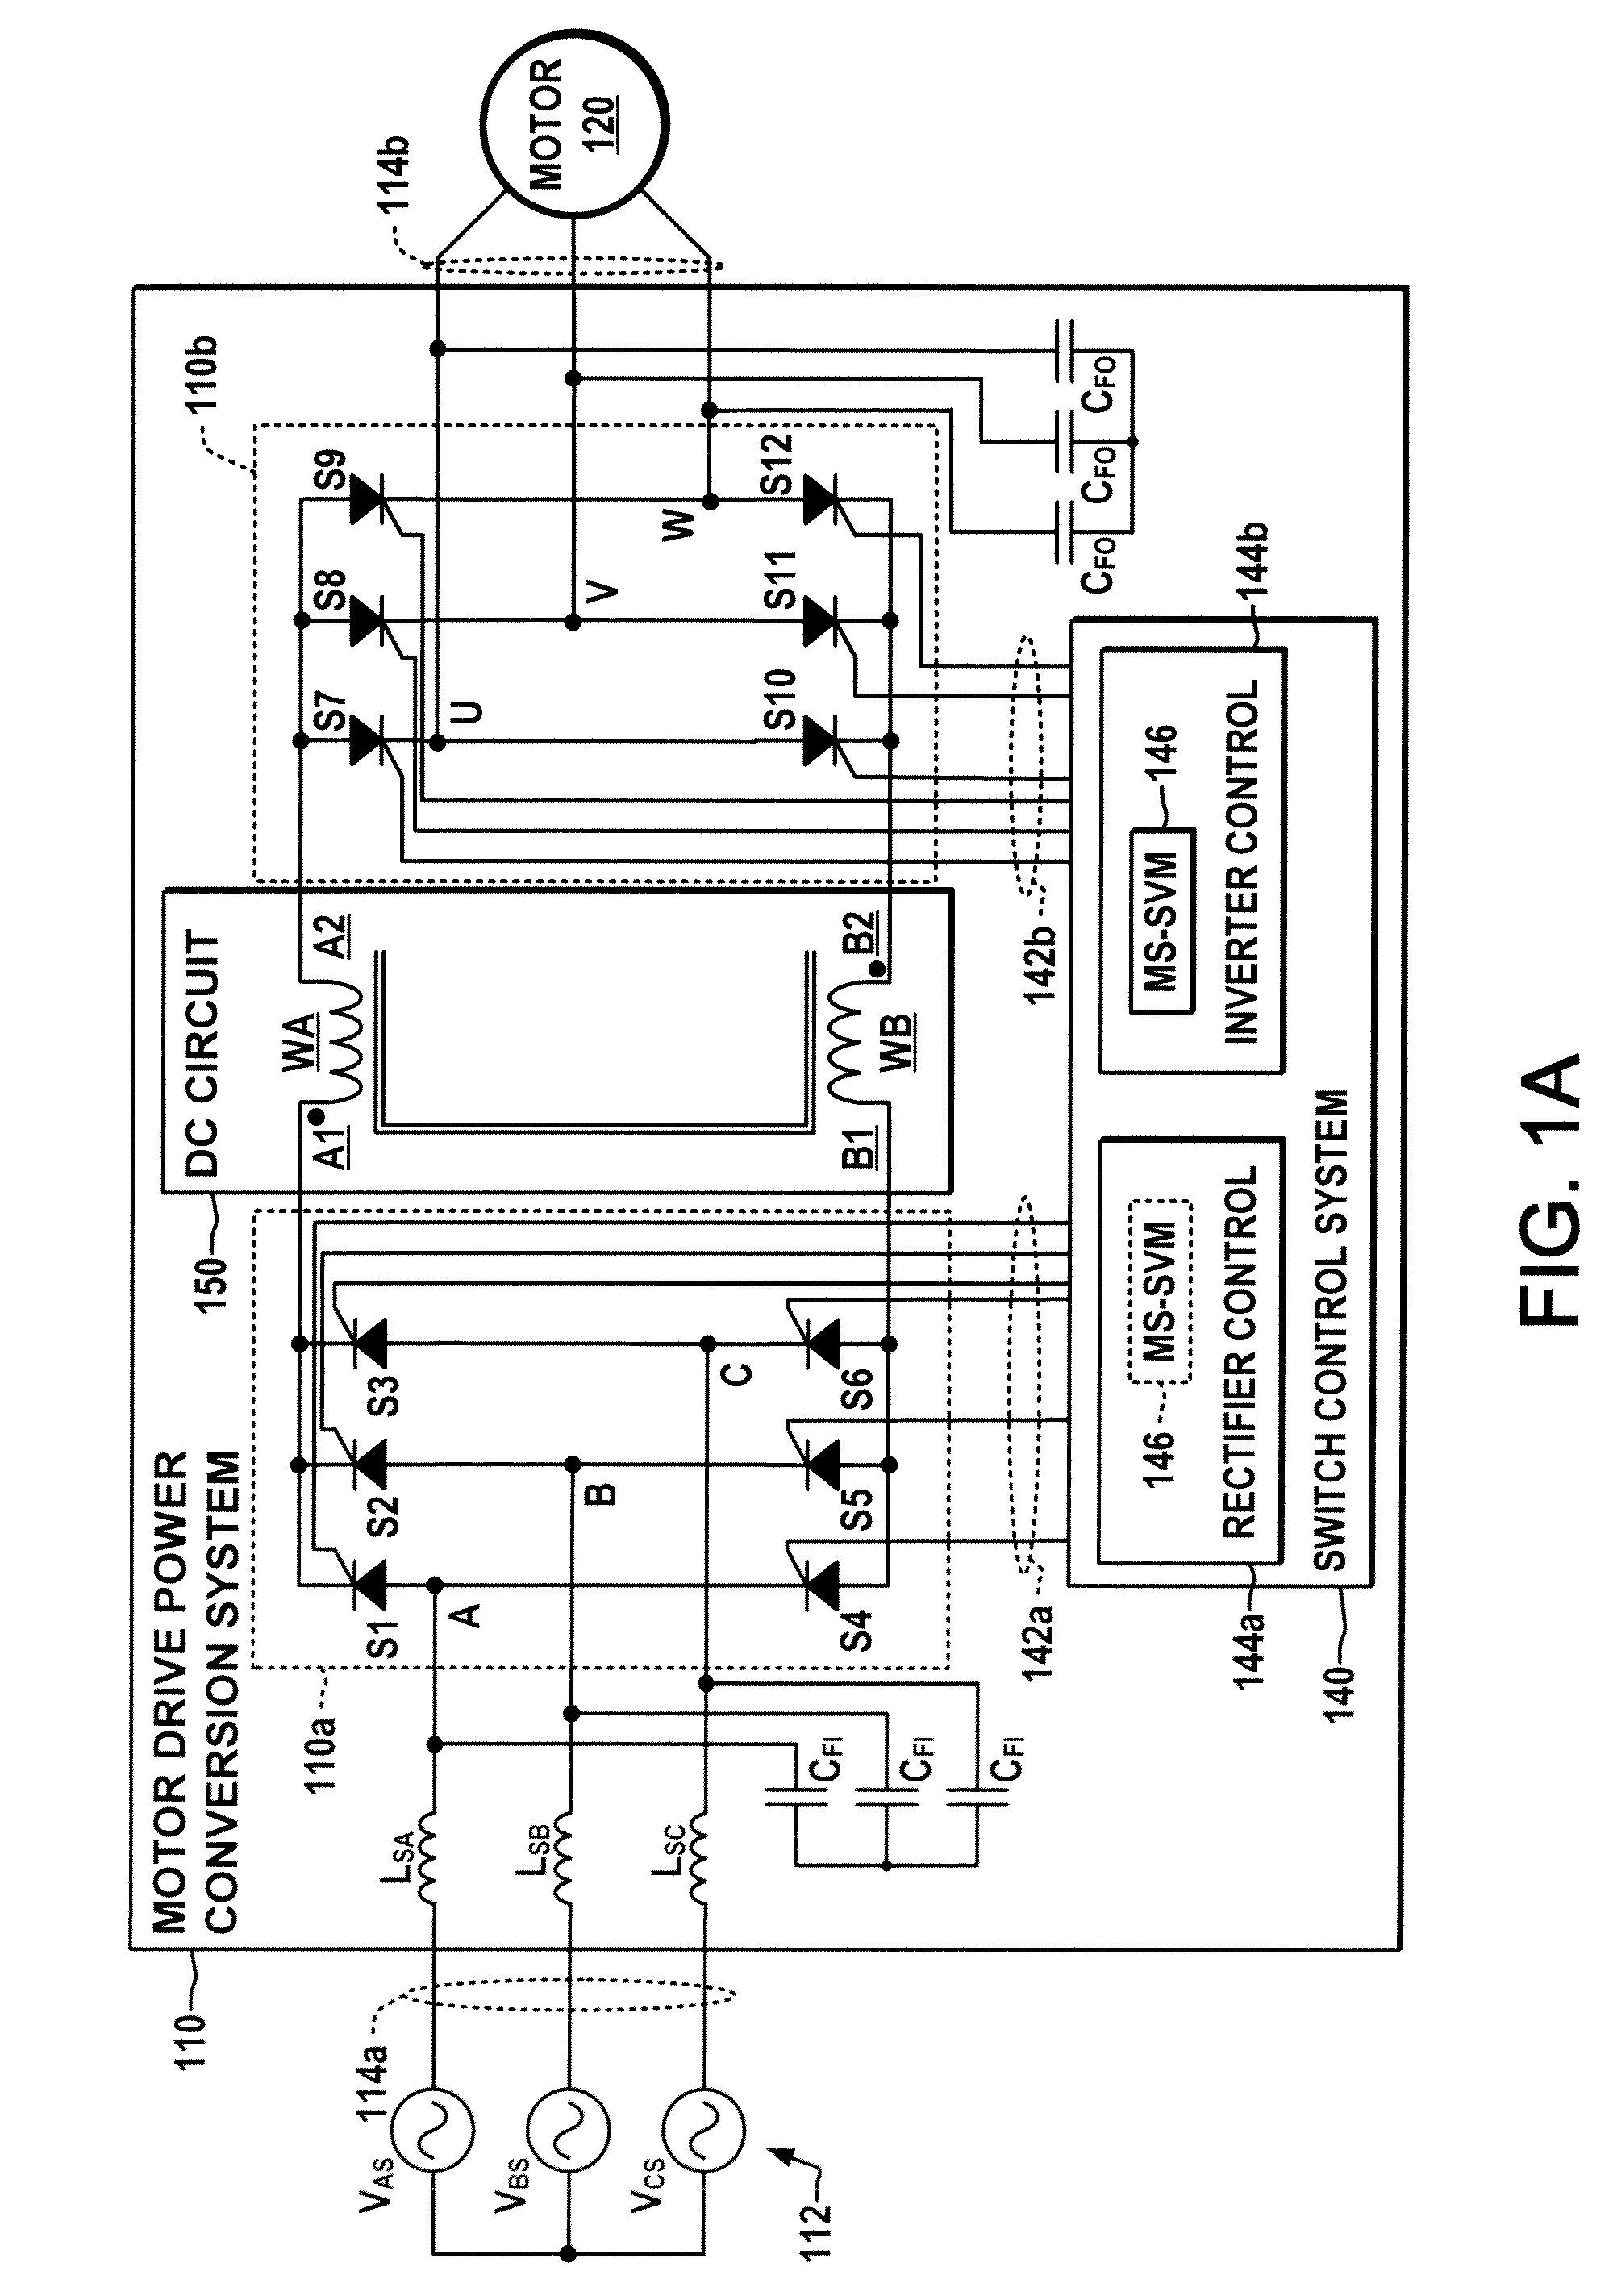 Power conversion systems and methods for controlling harmonic distortion